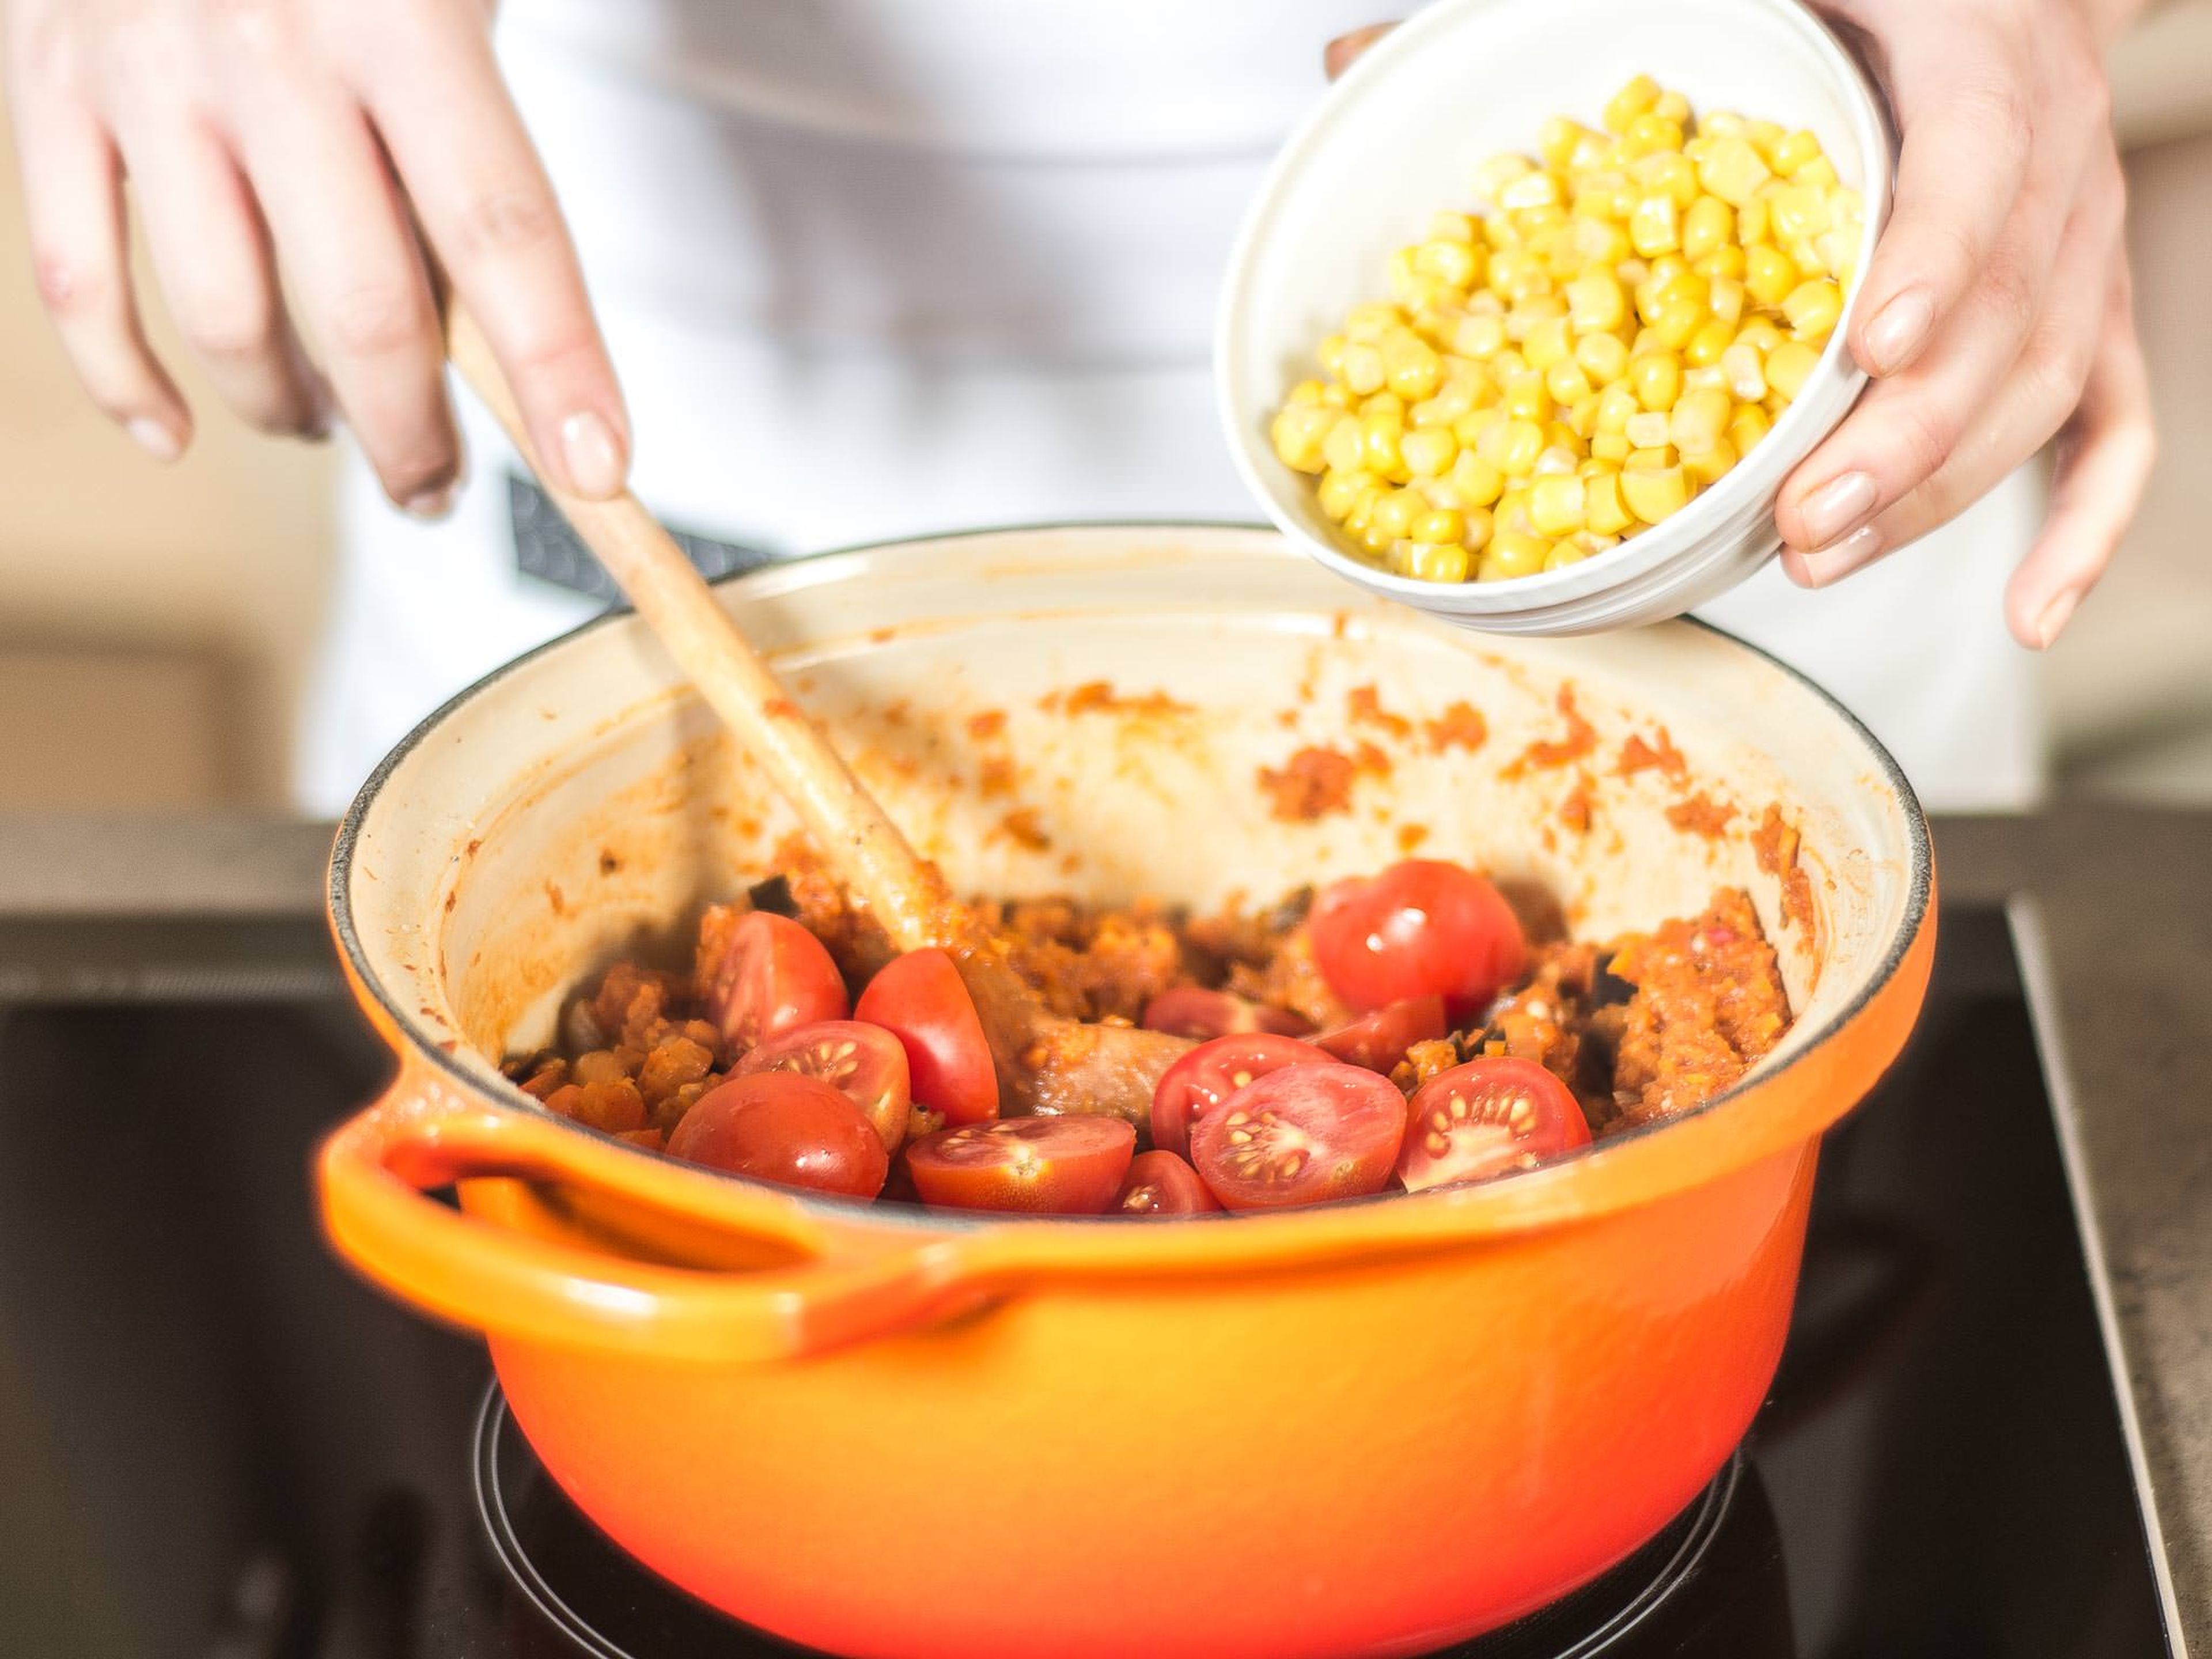 Add cherry tomatoes and corn to the cooked vegetables, and briefly return to a boil. Next, season with cumin, sugar, salt, and pepper. Stir in basil.